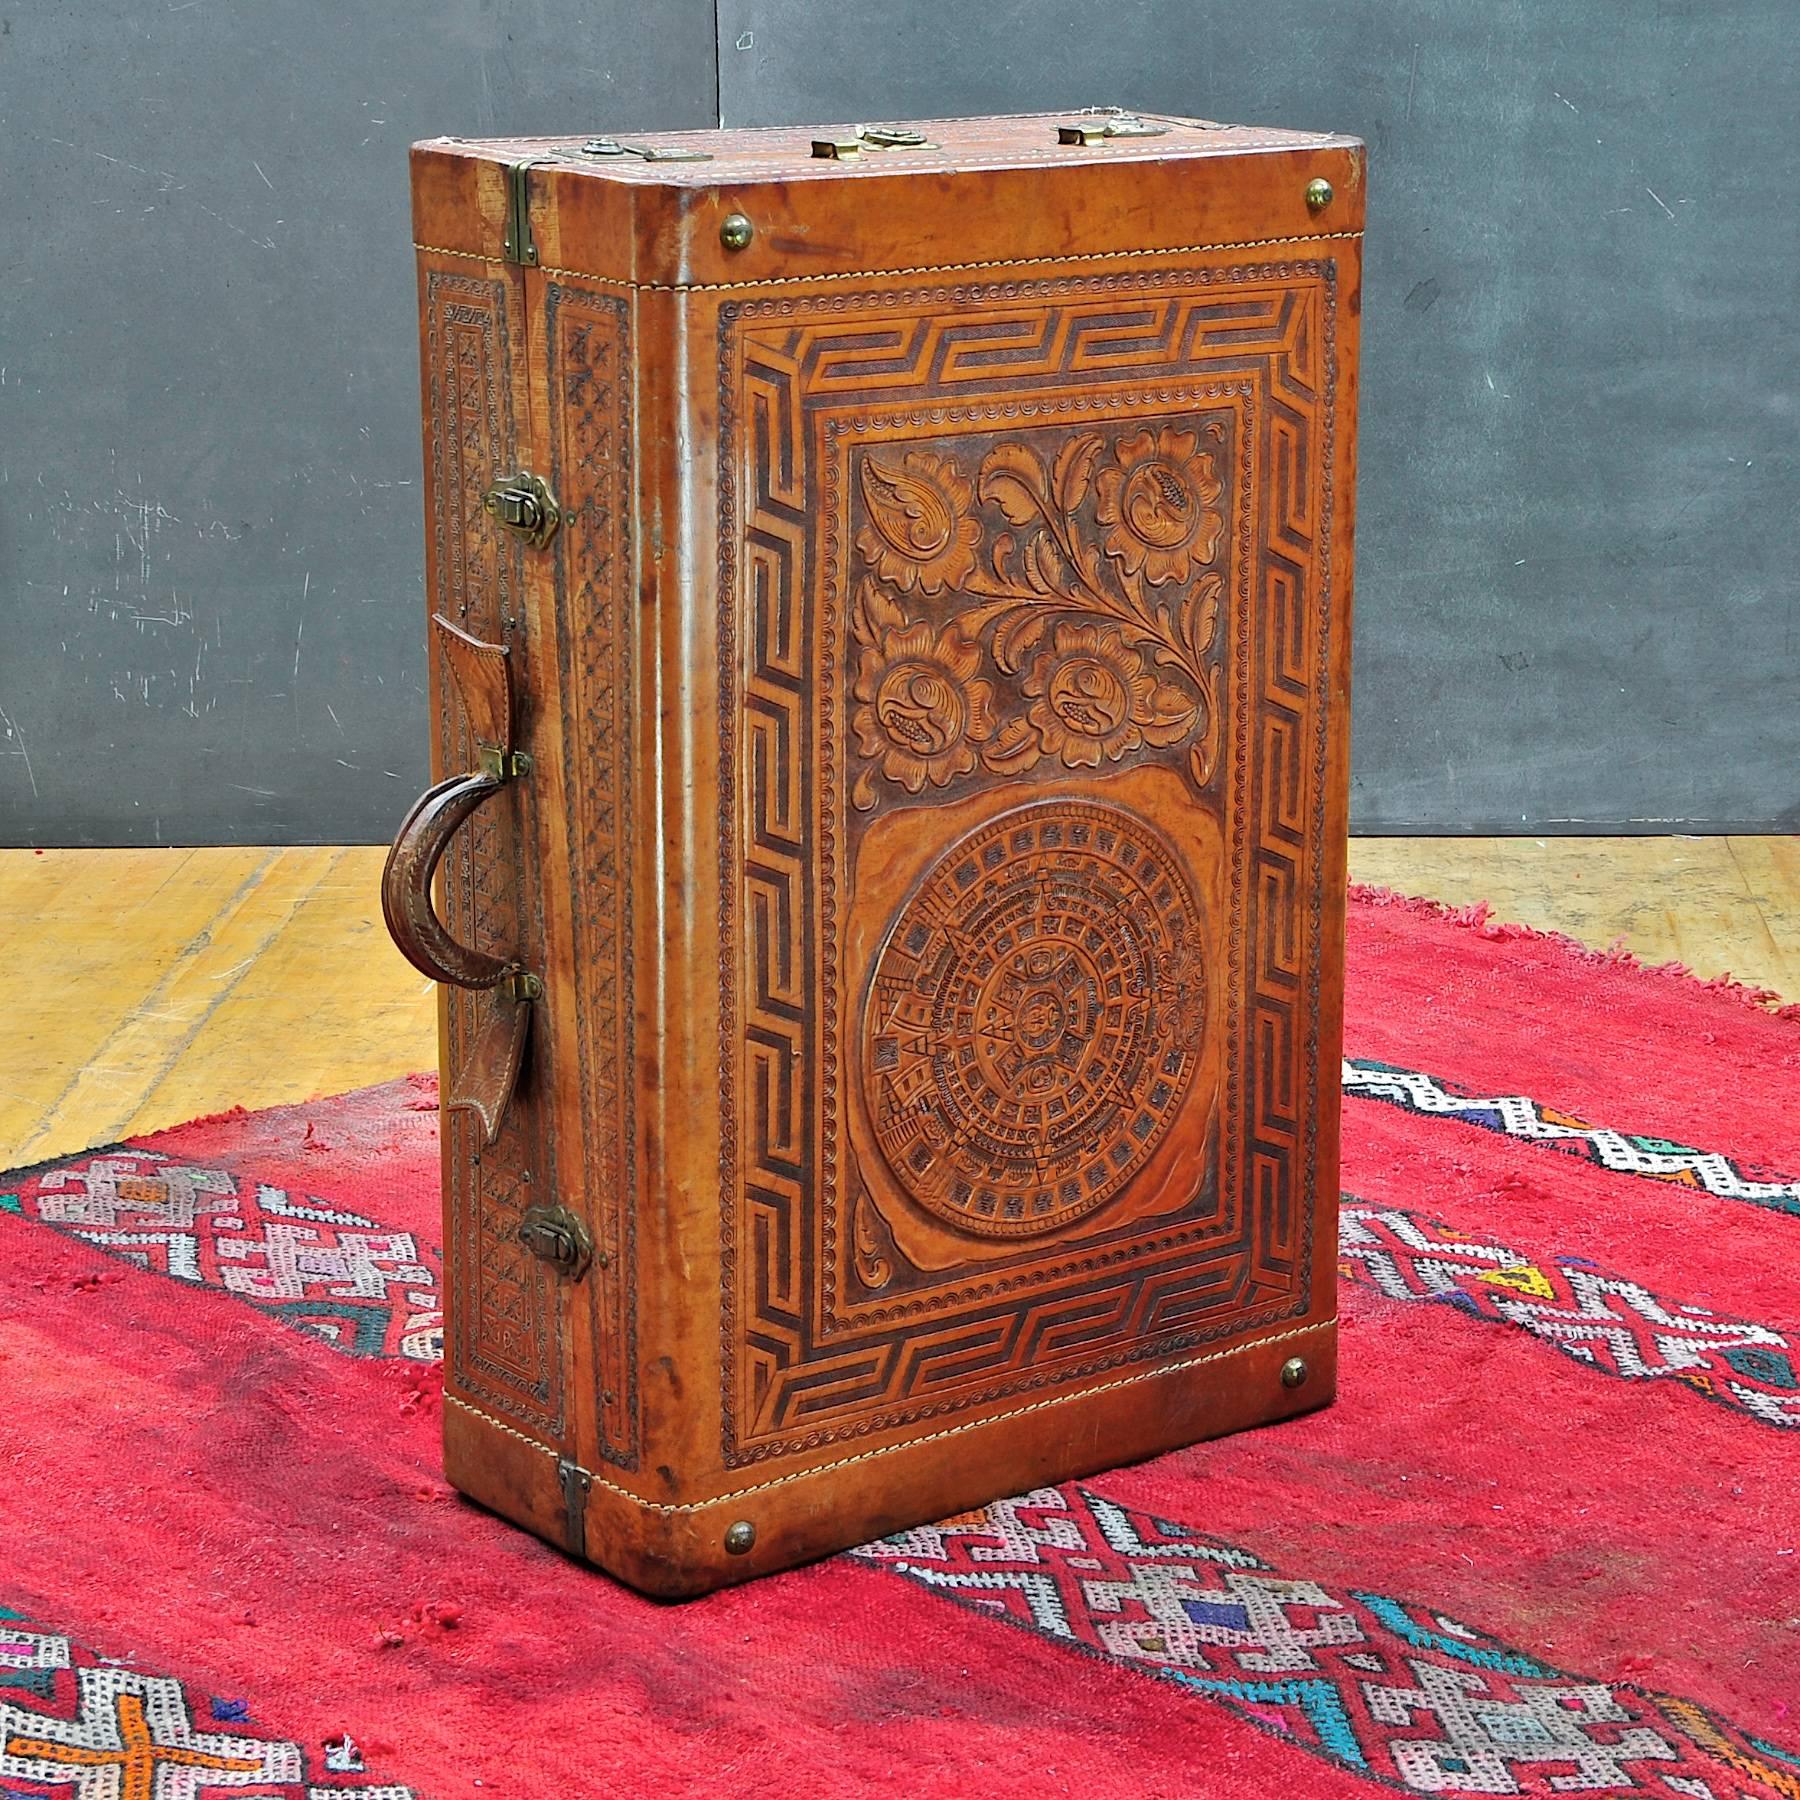 A souvenir, relic from an old Mexican Excursion. Vintage handmade wardrobe suitcase, hand-carved or impressed leather. Good vintage condition, showing some wear and staining, consistent with age. 

Measures: Width 29½ x depth: 19½ x height: 10 in.